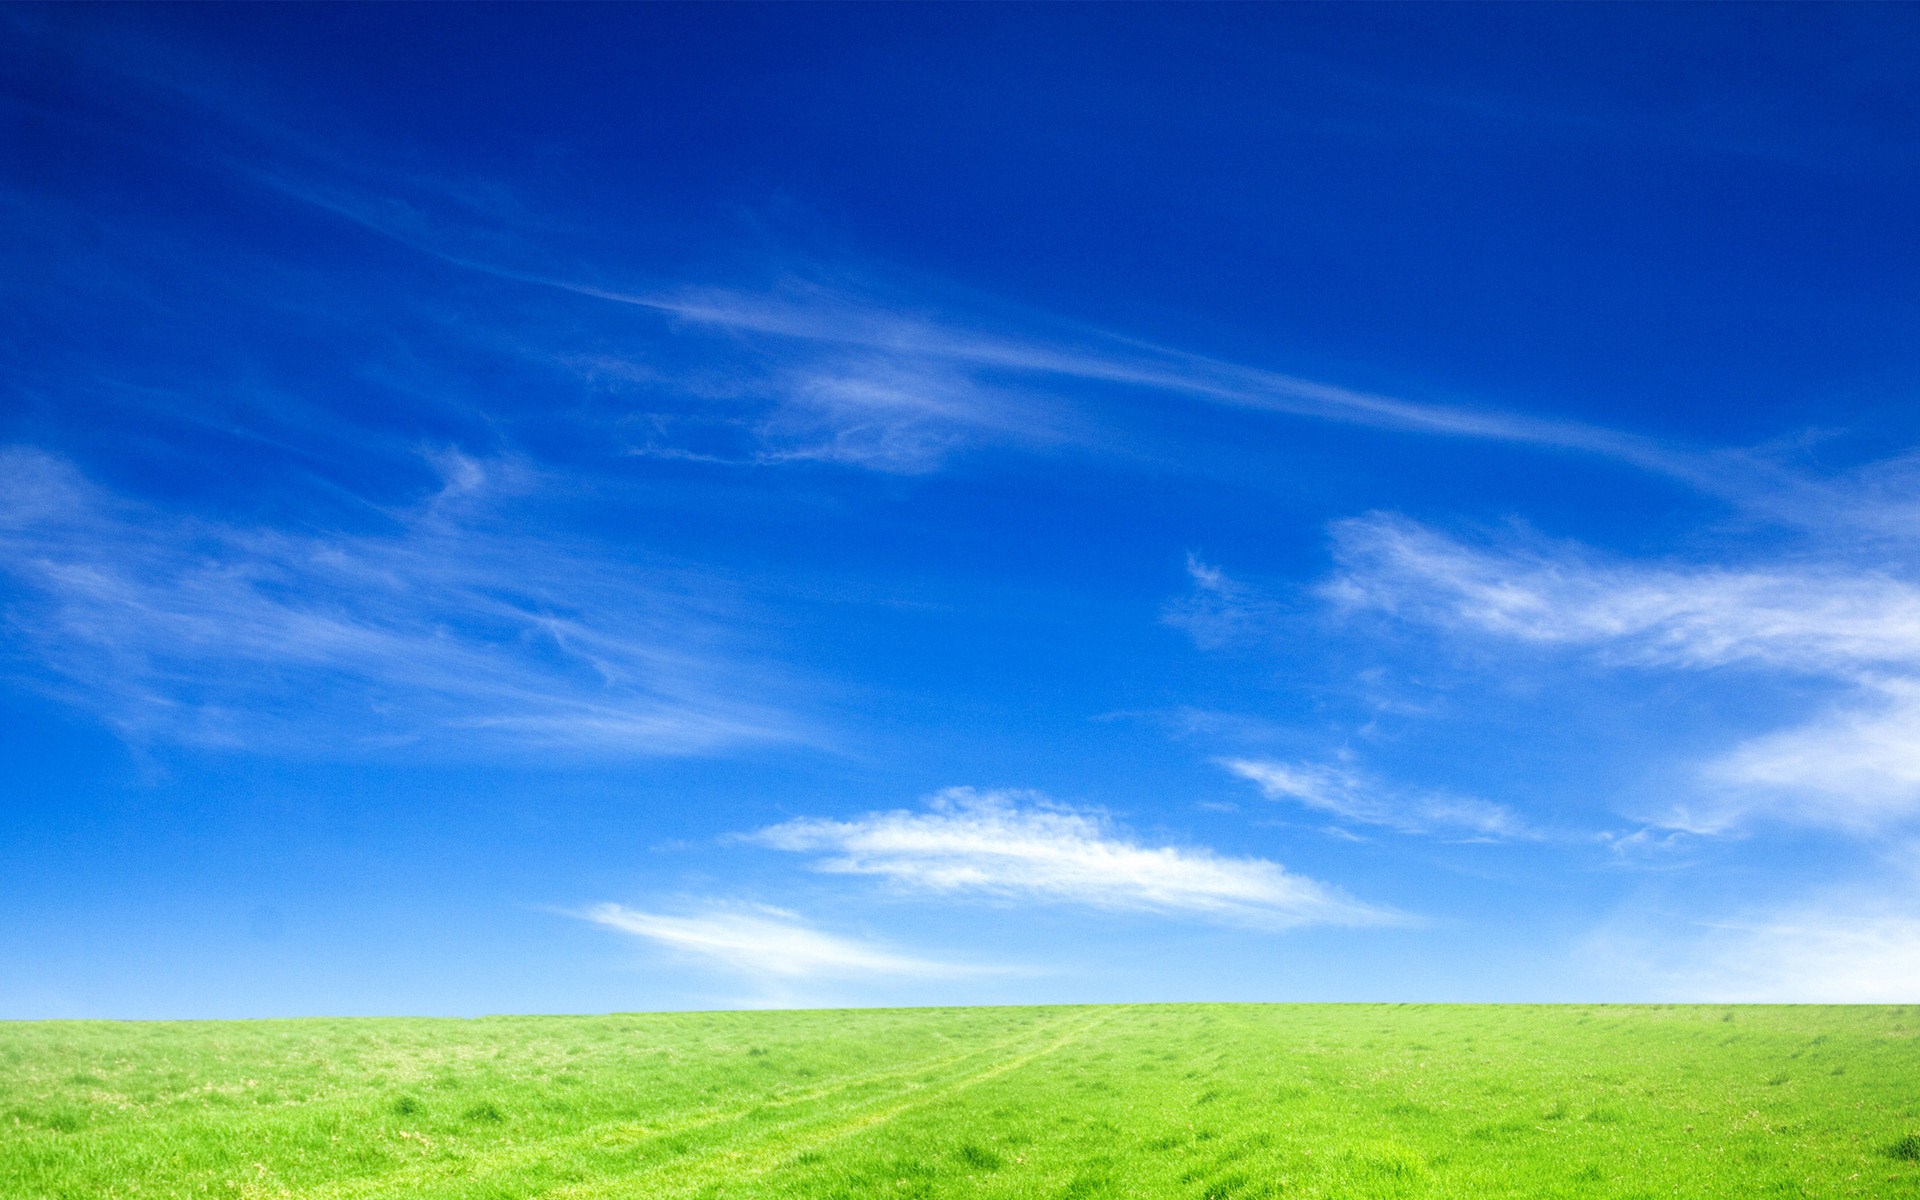 Blue Sky And Green Grass Wallpaper 1920x1200,How To Grill Tuna Belly